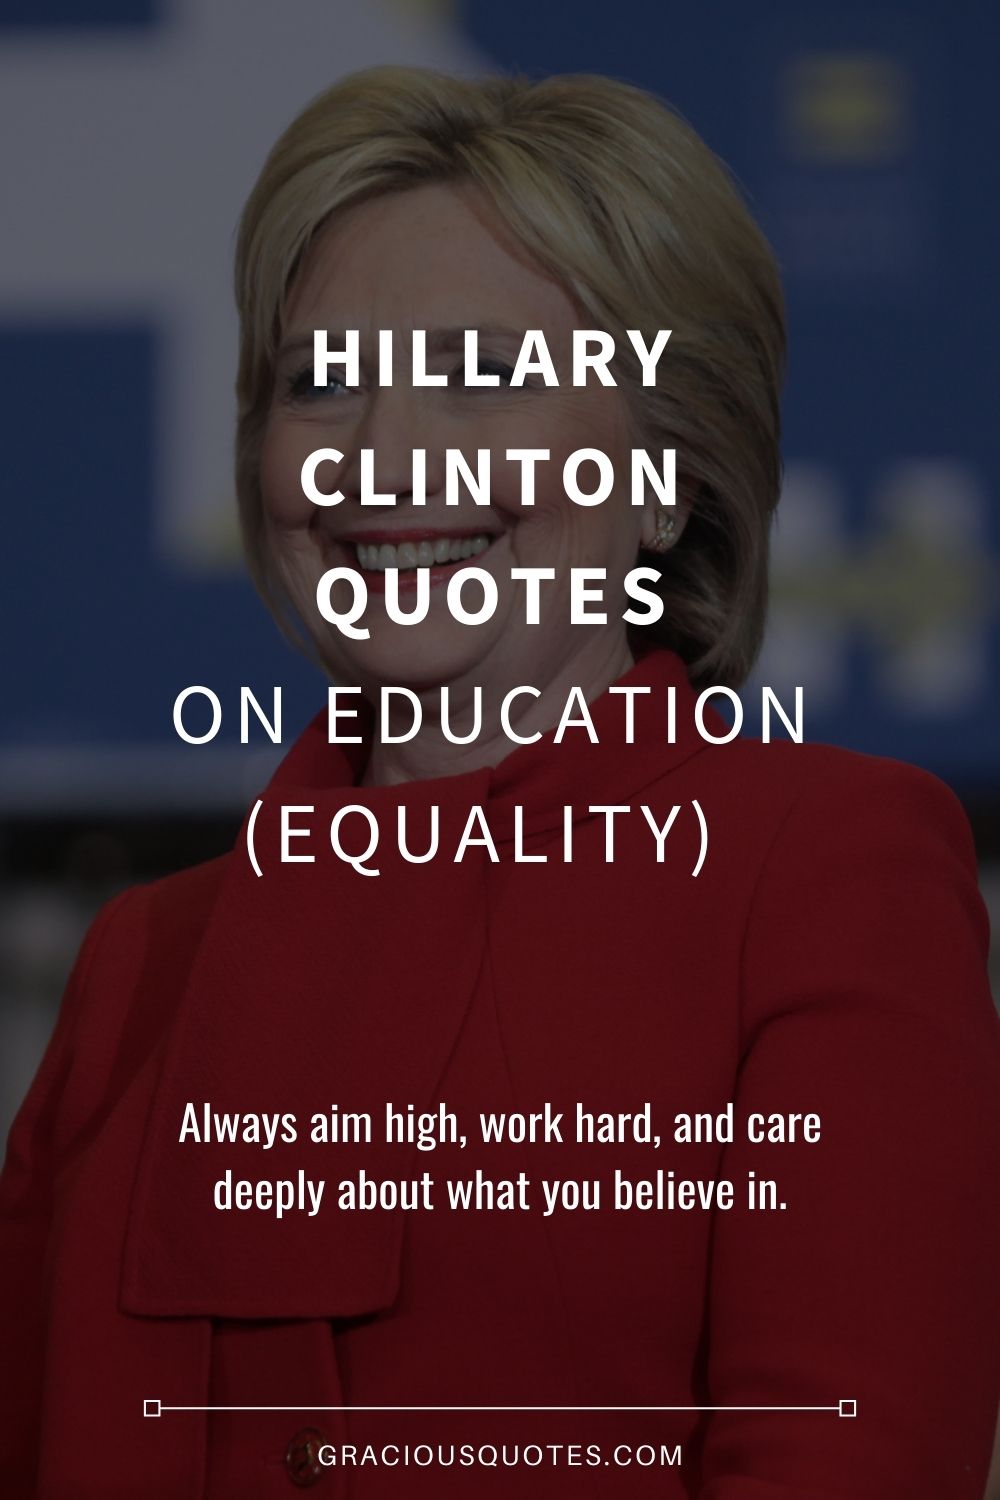 Hillary Clinton Quotes on Education (EQUALITY) - Gracious Quotes